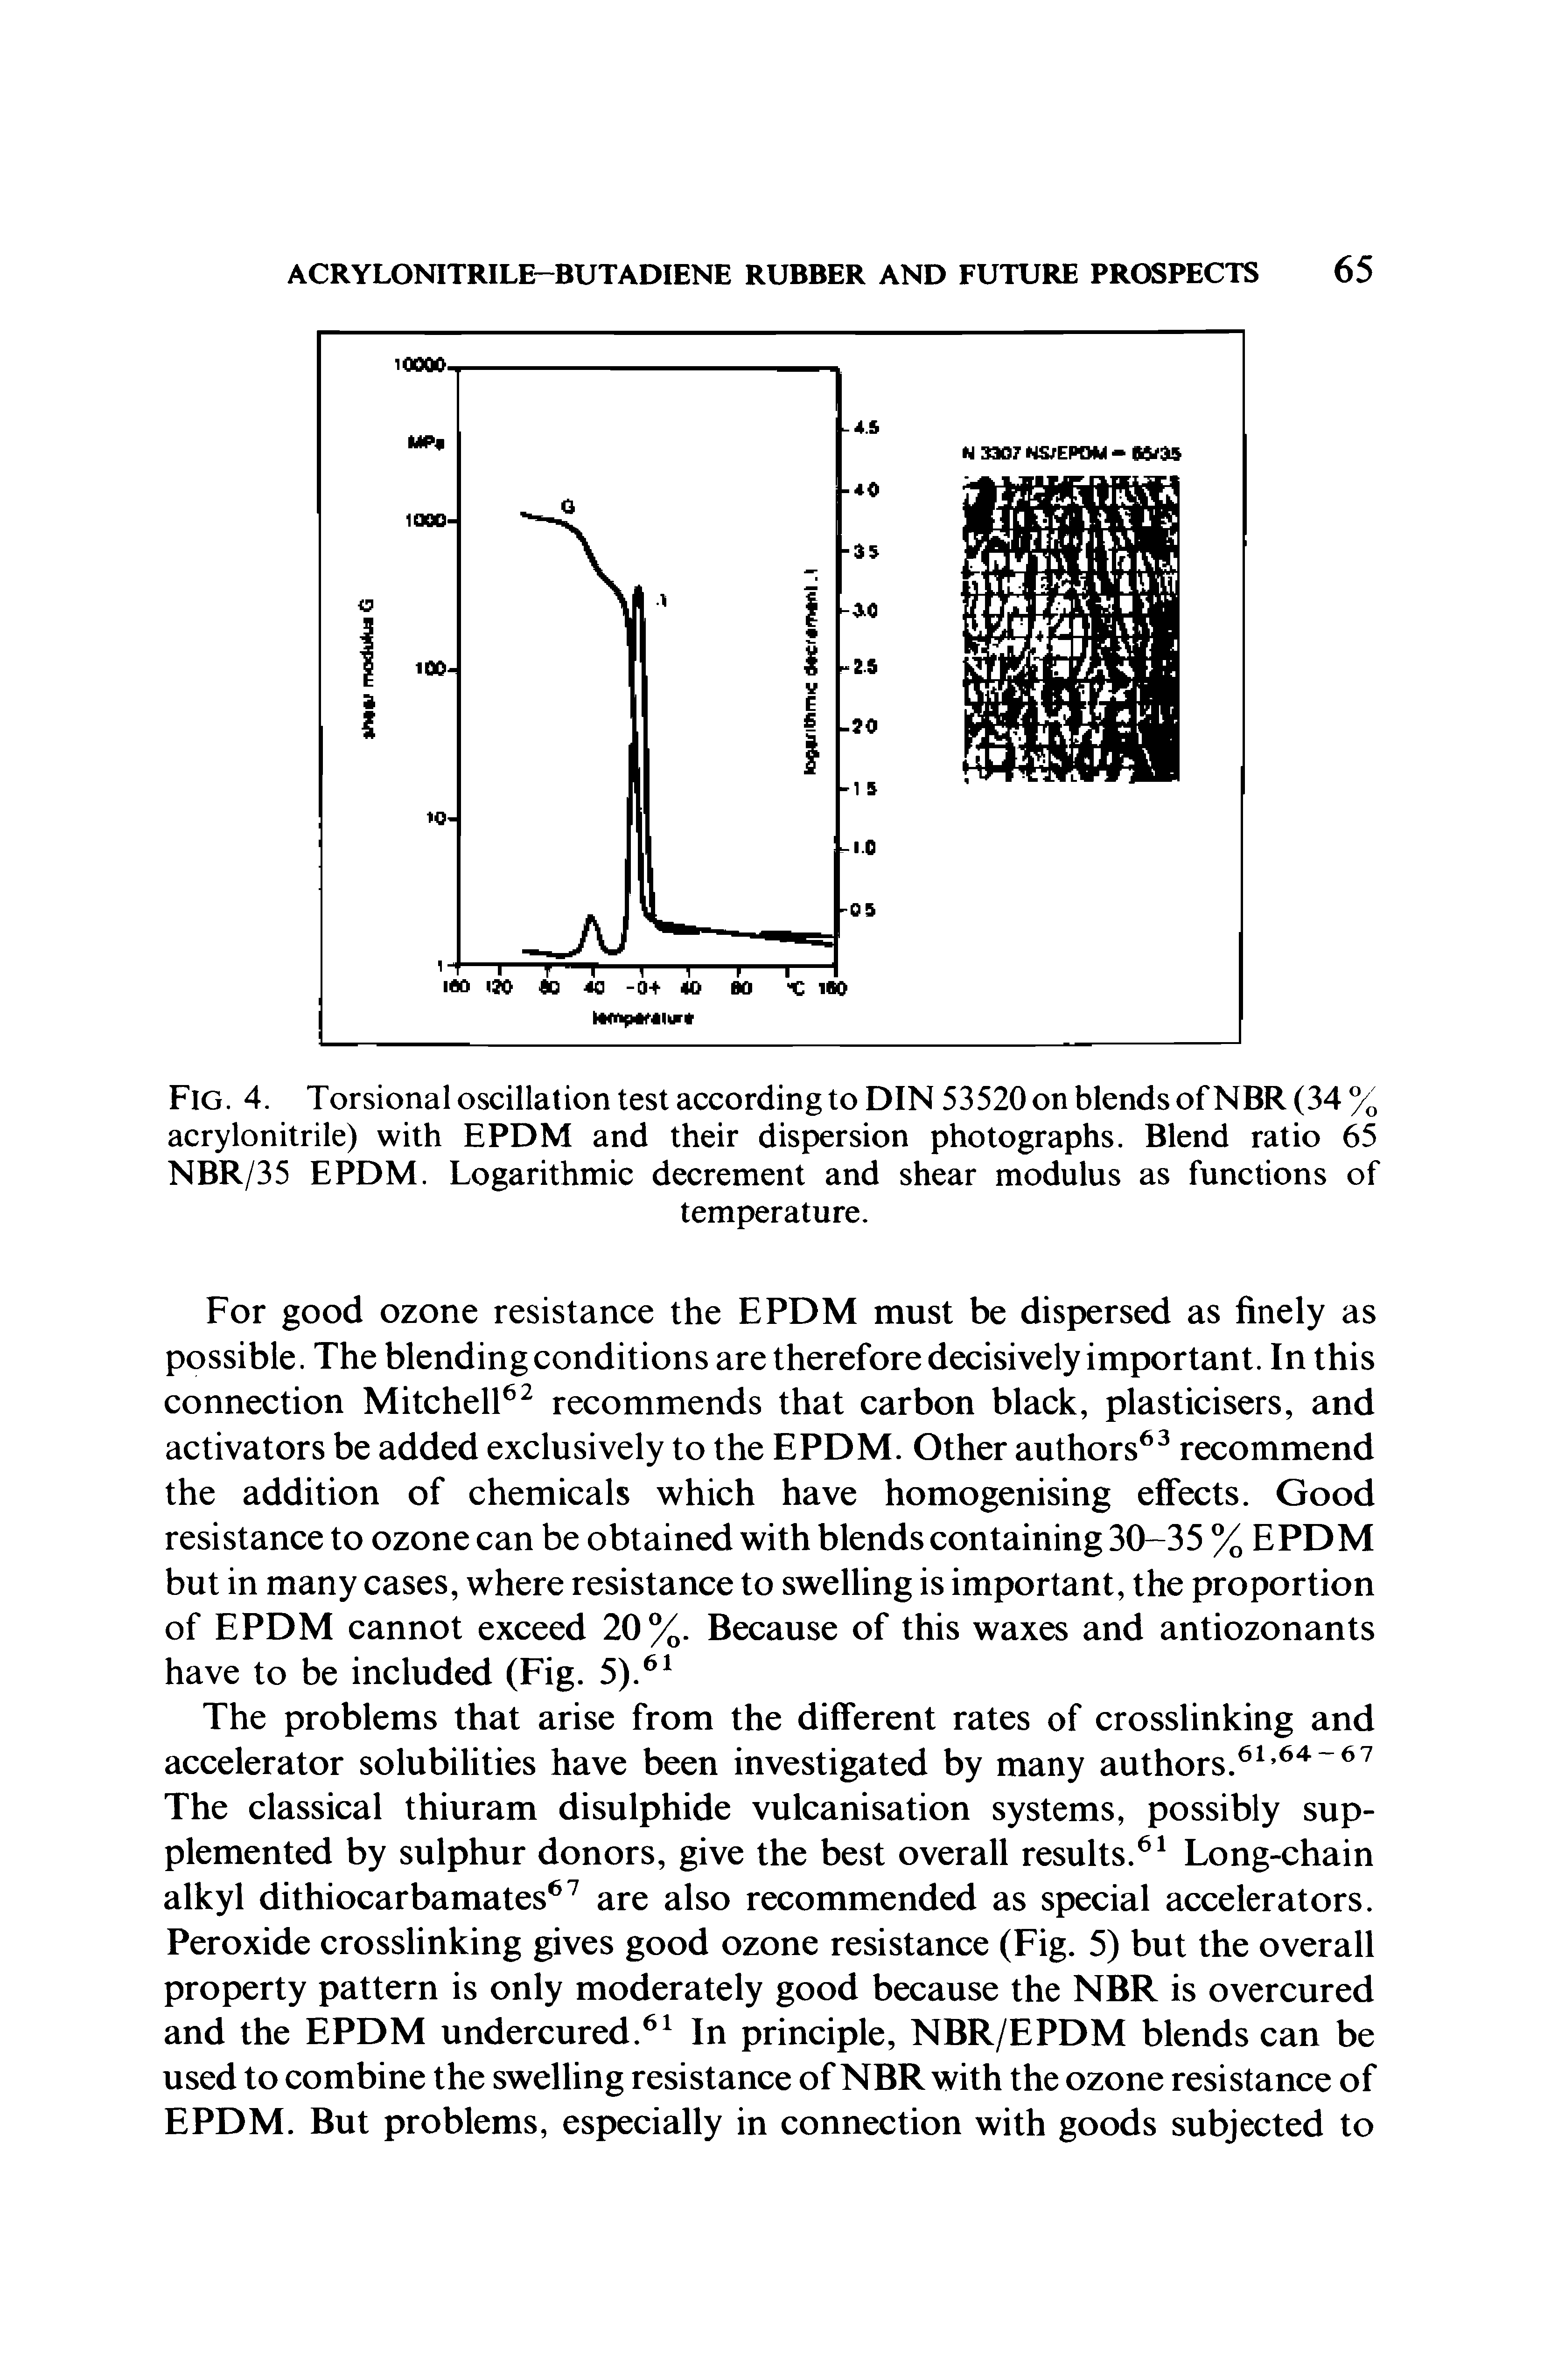 Fig. 4. Torsional oscillation test according to DIN 53520 on blends of NBR (34% acrylonitrile) with EPDM and their dispersion photographs. Blend ratio 65 NBR/35 EPDM. Logarithmic decrement and shear modulus as functions of...